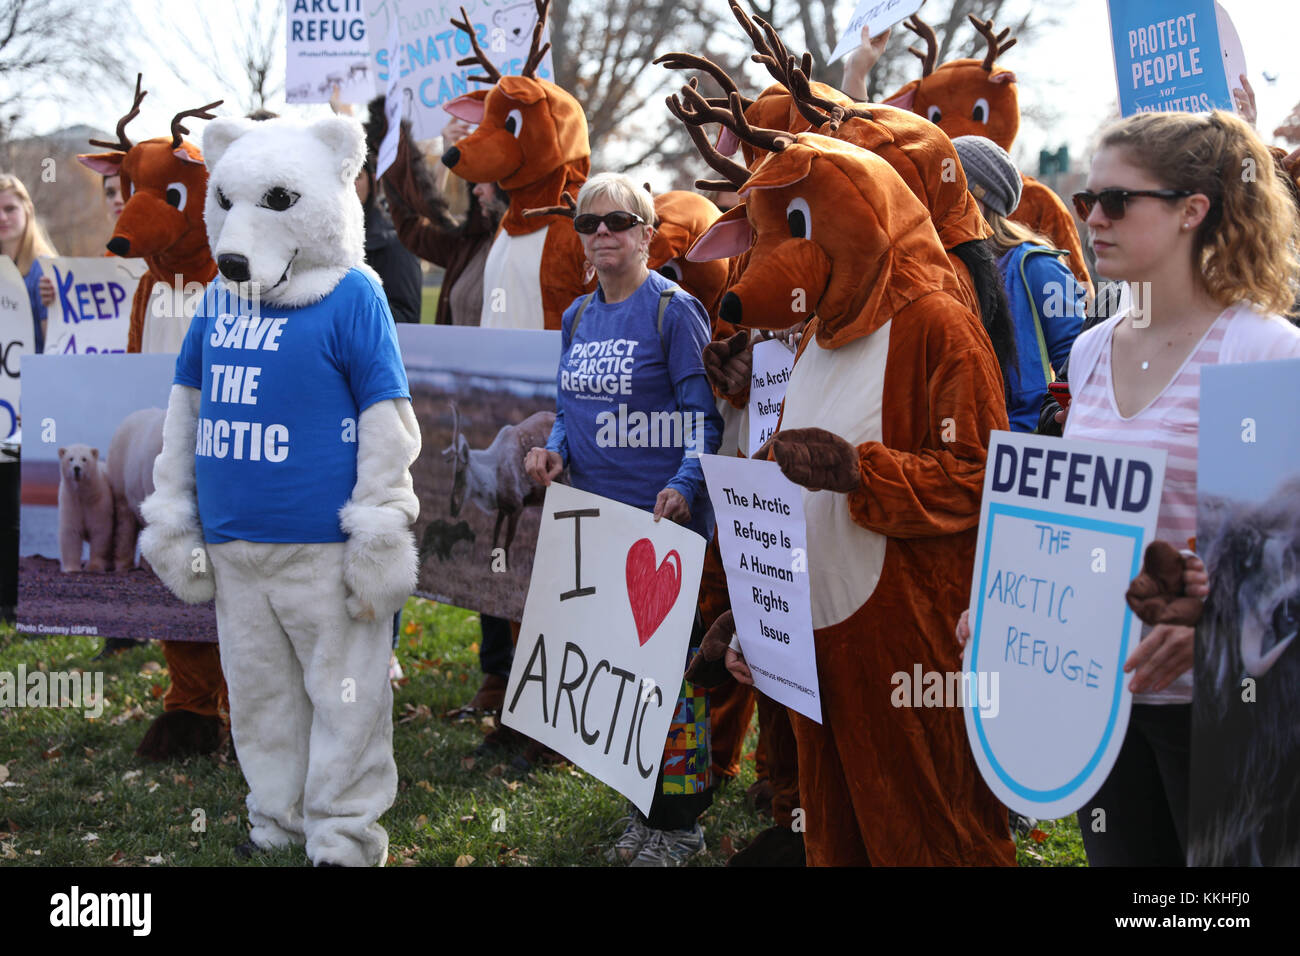 Washington, United States. 30th Nov, 2017. Alaska Wilderness League activists wear caribou costumes during a protest against drilling in the Arctic National Wildlife Refuge outside the U.S. Capitol November 30, 2017 in Washington, DC. The Republican led Senate is attempting to allow oil drilling in the Arctic by hiding it in the tax cut bill. (photo by US Senate Photo via Credit: Planetpix/Alamy Live News Stock Photo